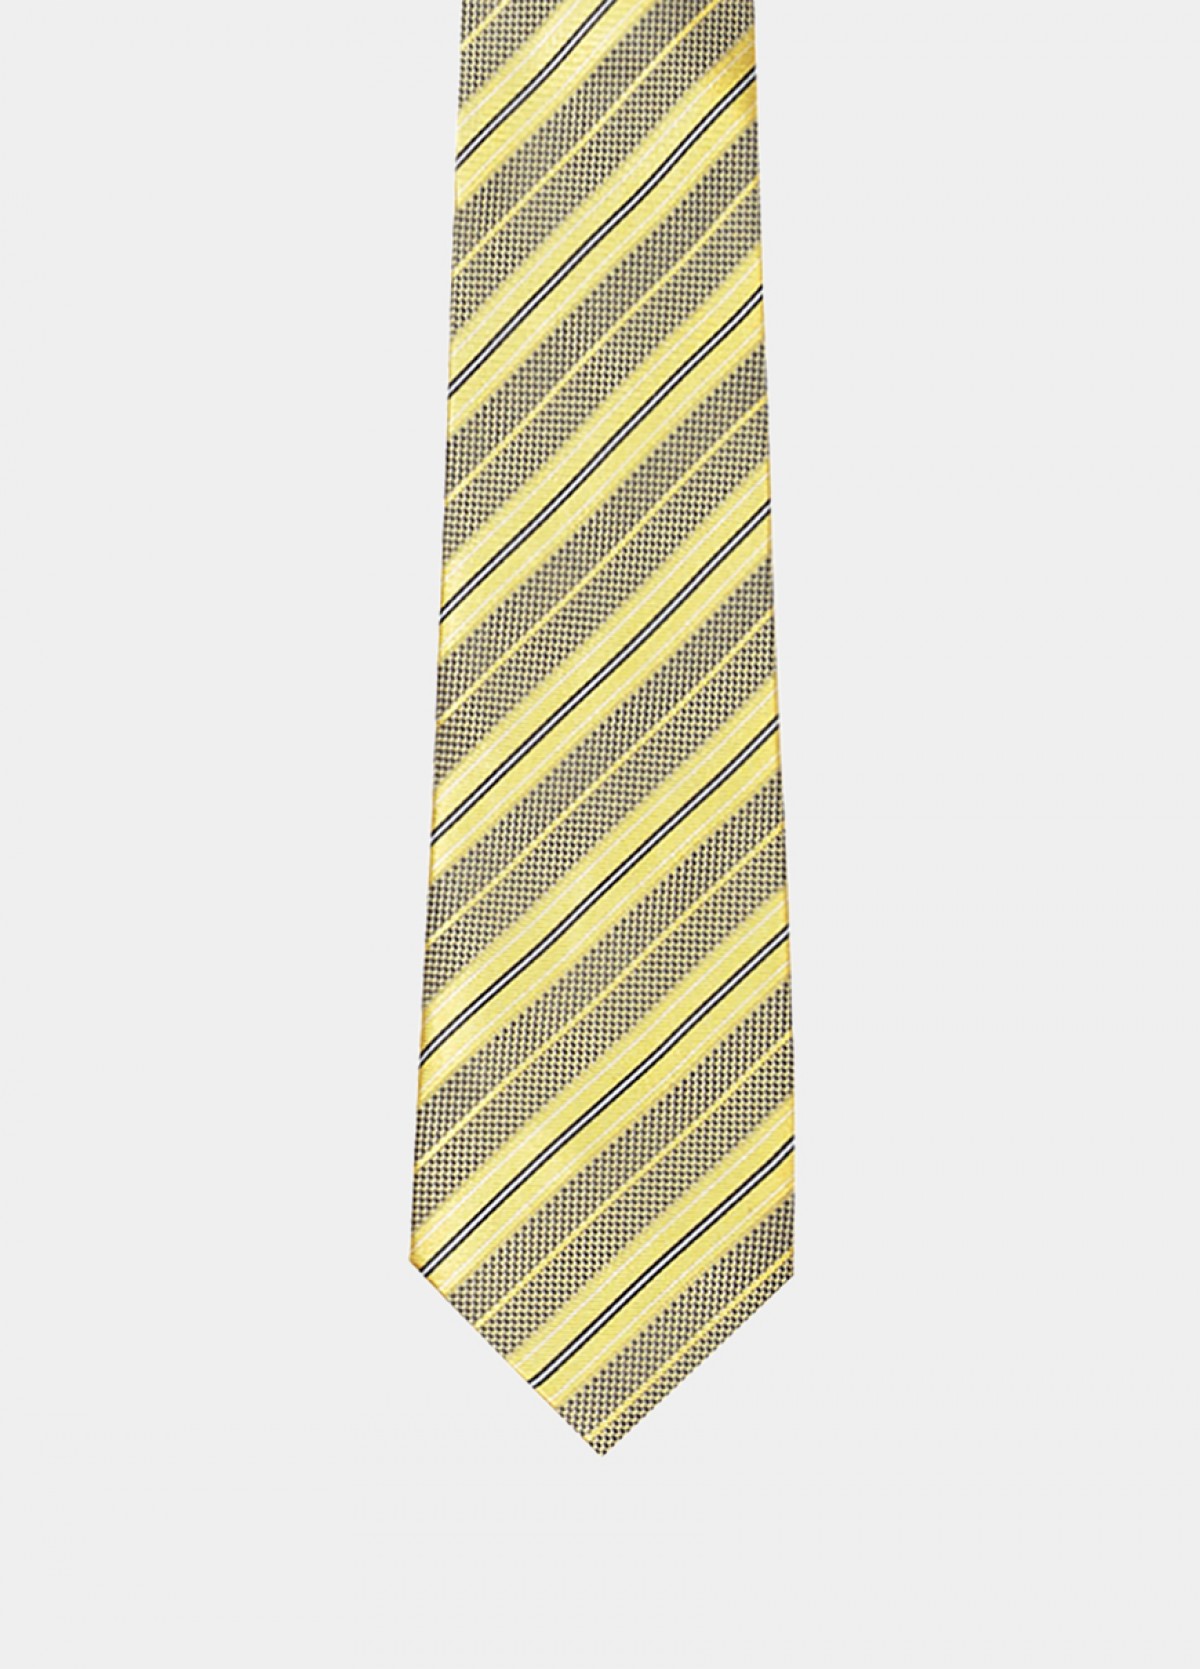 The Yellow Stain Resistant Tie